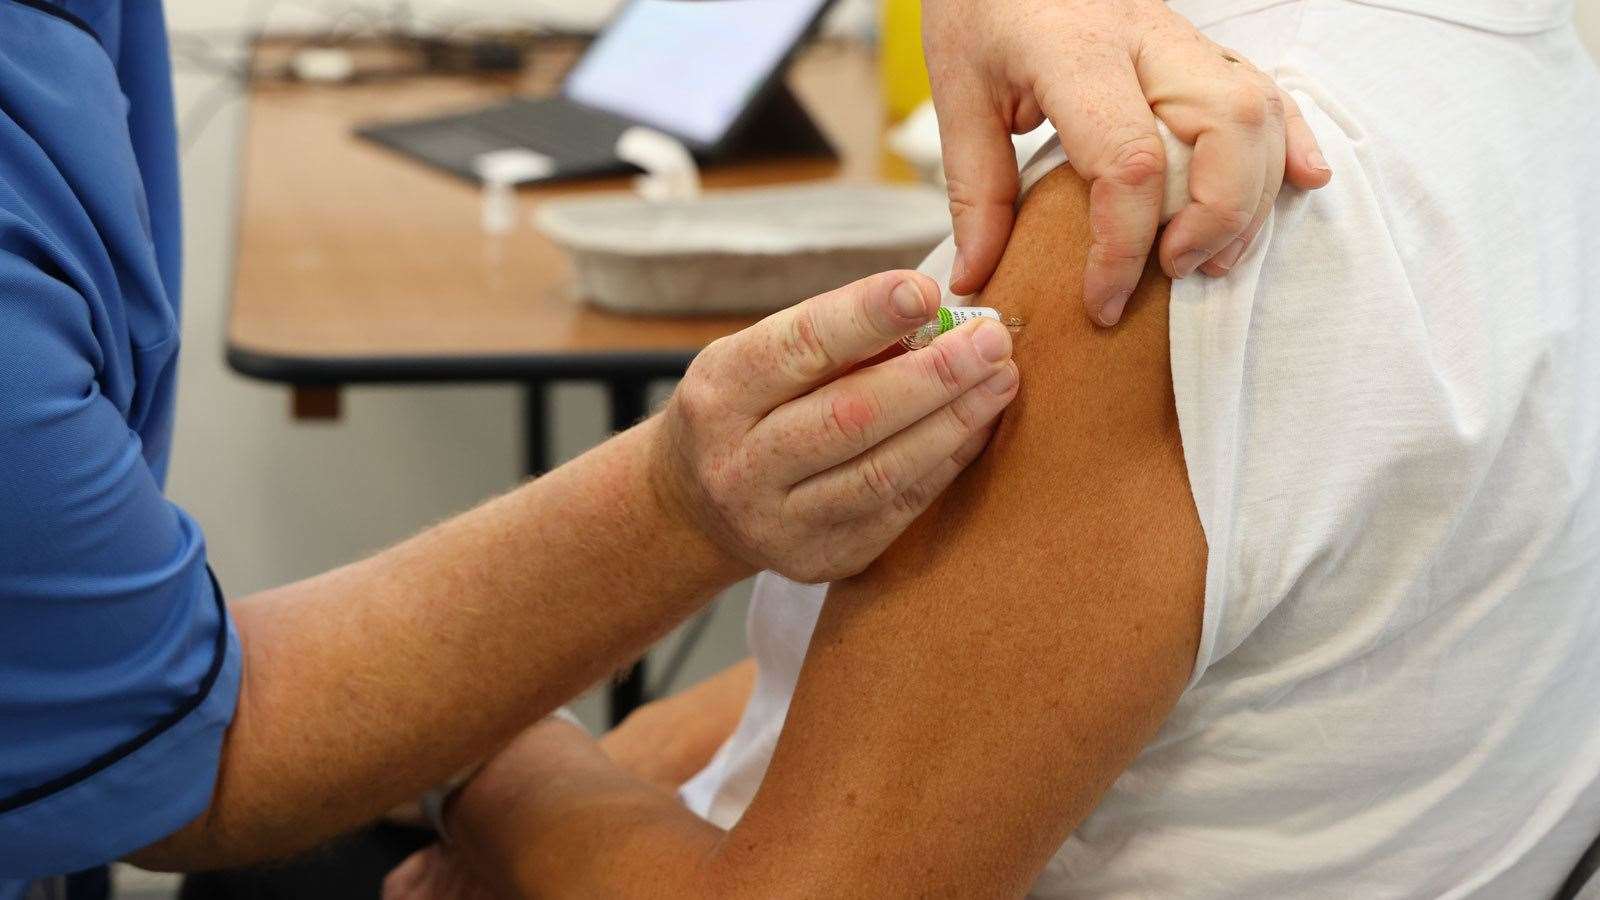 Flu and Covid-19 vaccinations are being offered in Caithness next month.